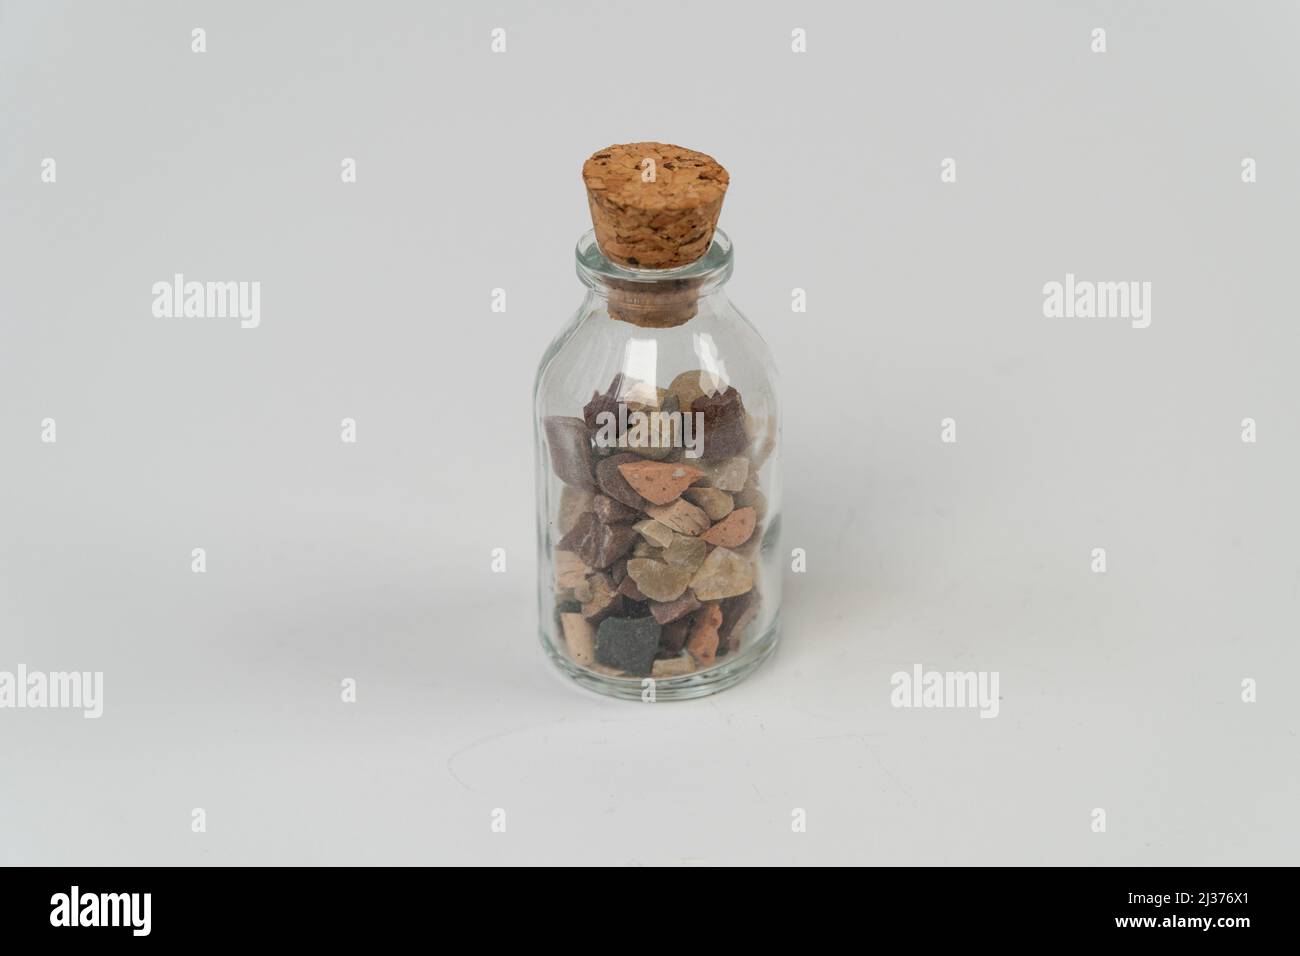 Small rocks in glass bottle with cork stopper isolated on white background, for remembrance, broken sand stones in glass bottle, saving memory on jar, Stock Photo